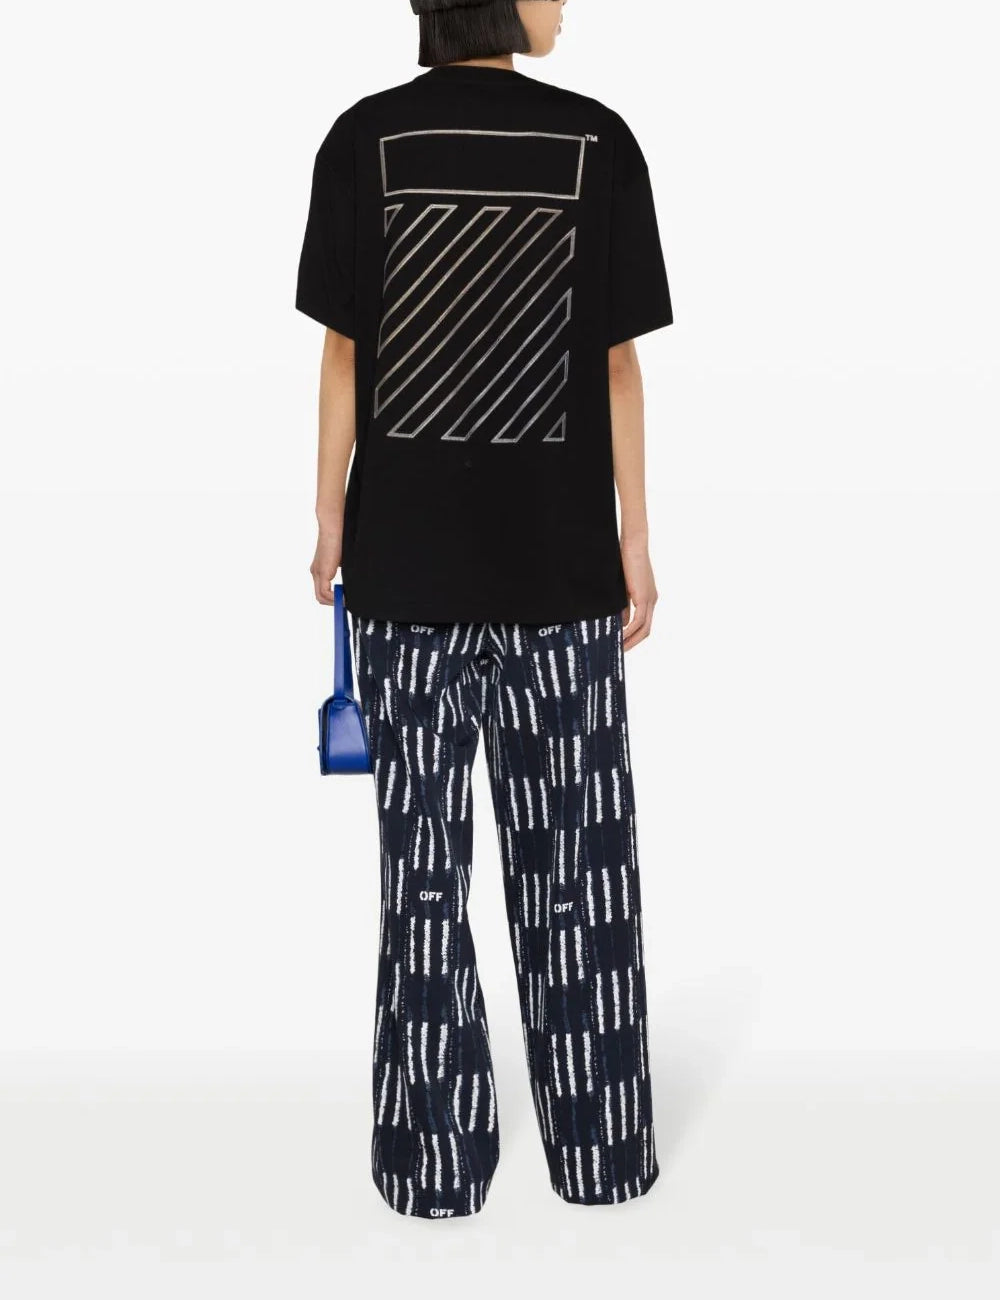 OFF WHITE EMBR DIAG TAB CASUAL TEE